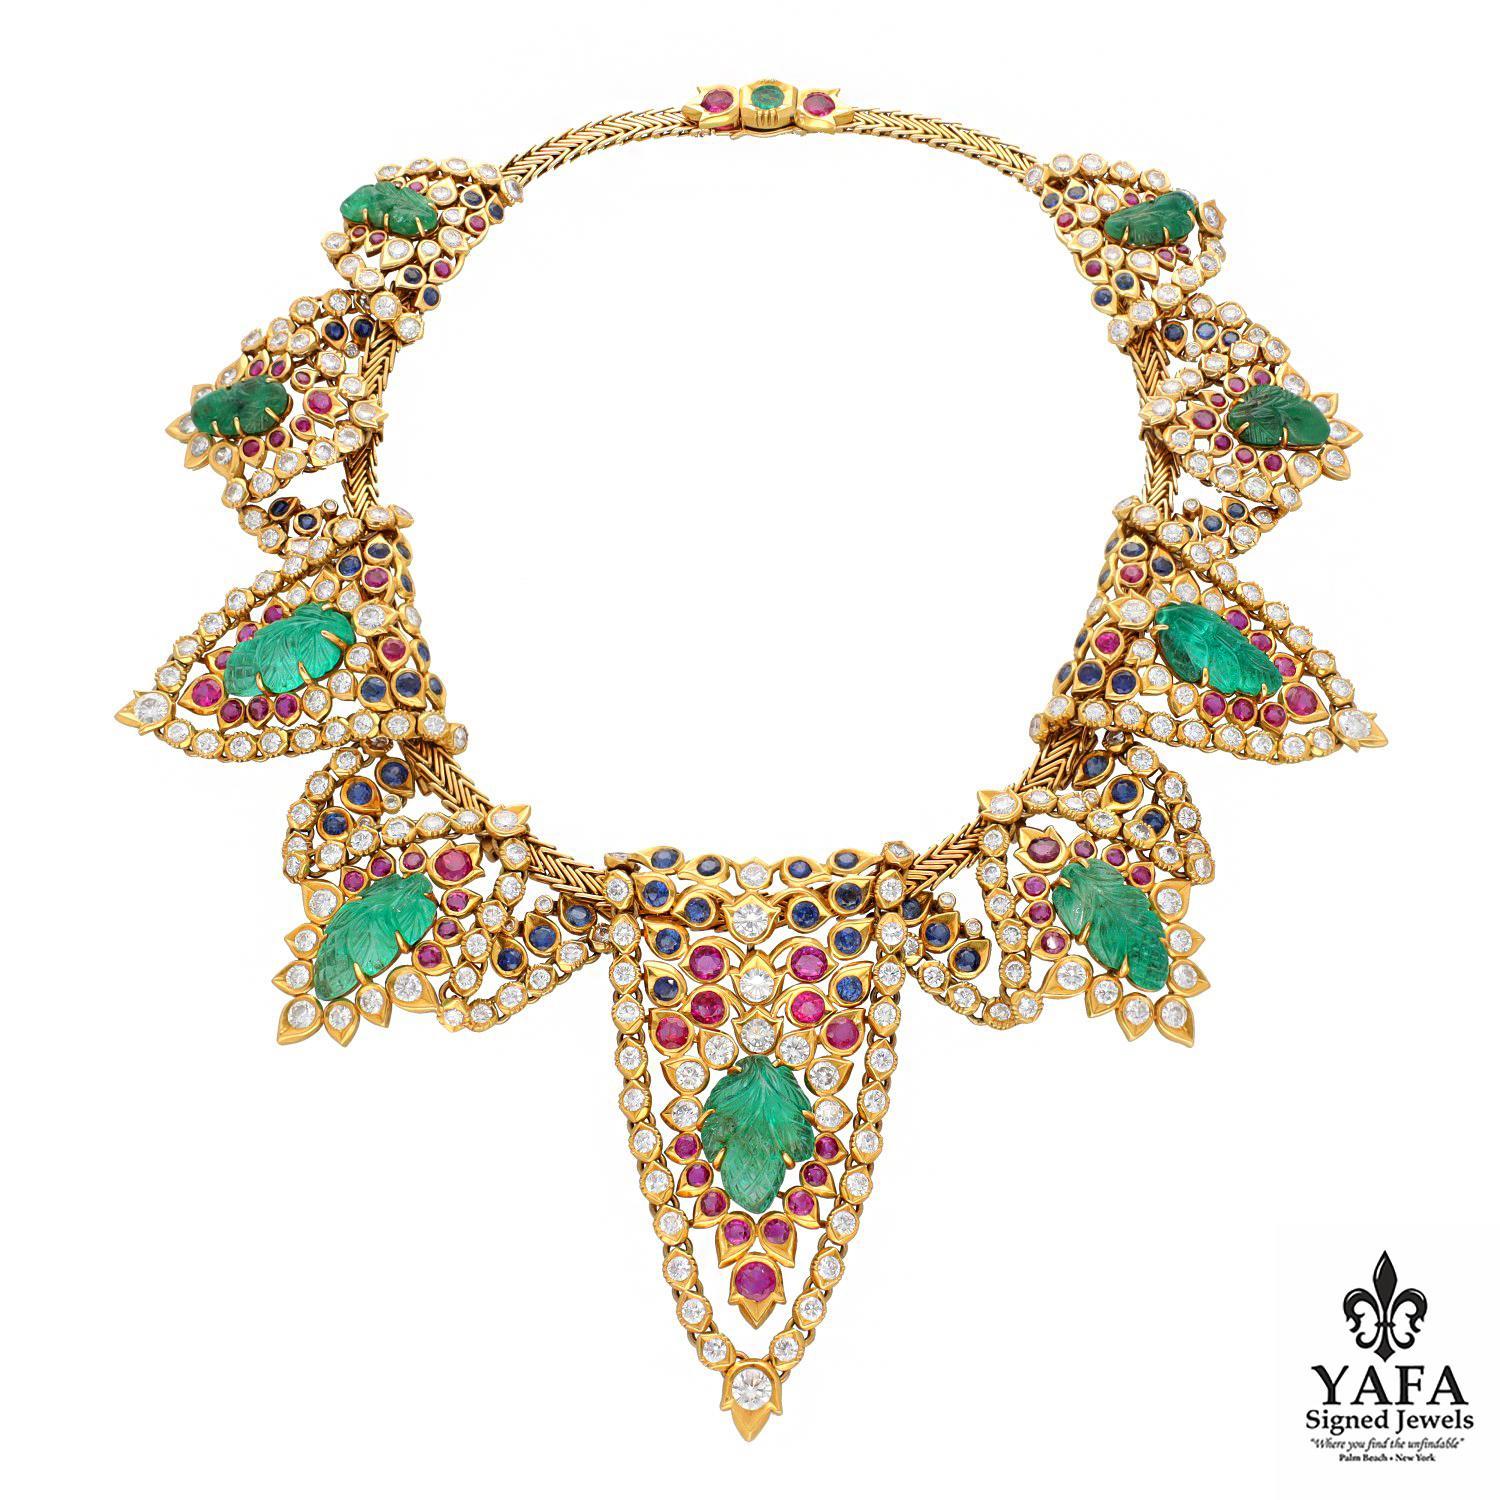 Cartier Paris Carved Emerald, Ruby, Sapphire and Diamond Drapery Necklace & Ear Clips.
Of Mughal Inspiration the Flexible Motifs Centering on Carved Emeralds, Collet-Set with Rounds Diamonds as well as Round Rubies and Sapphires, on a Herringbone